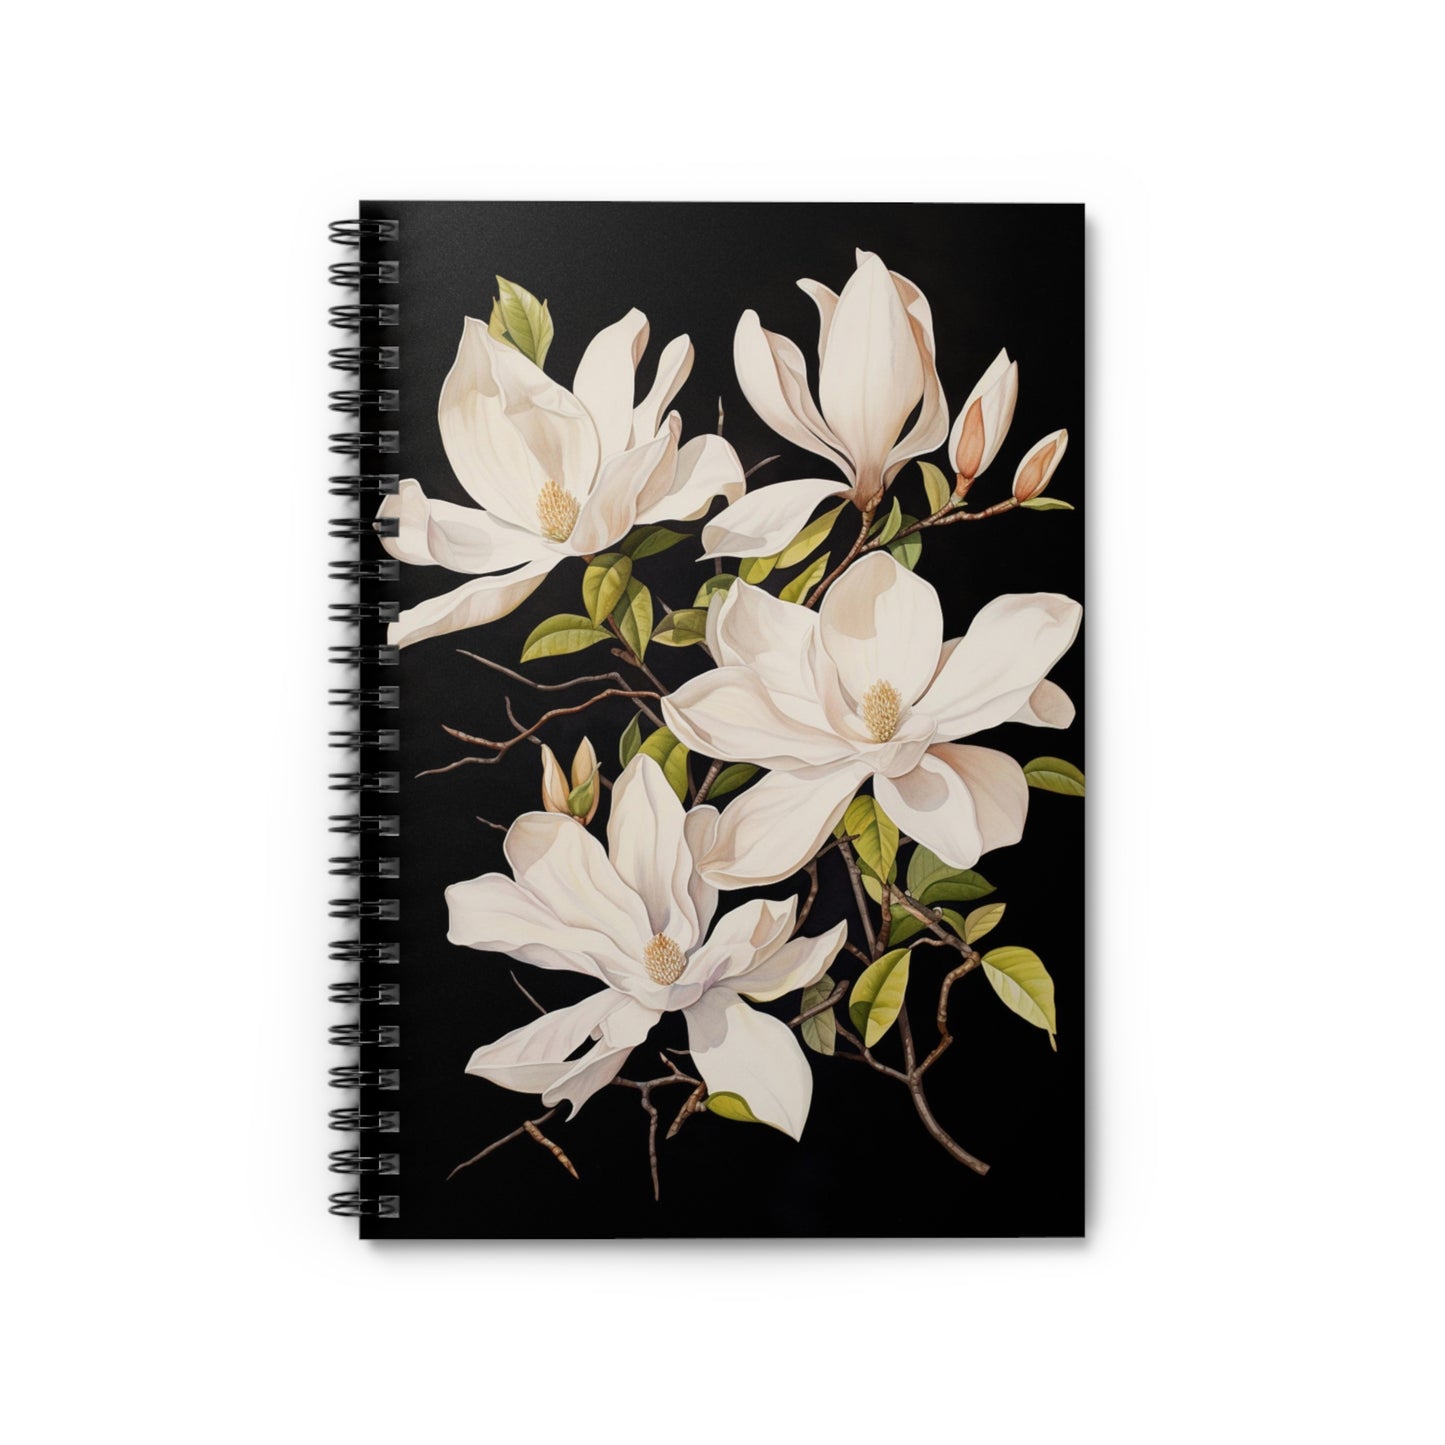 White Magnolias Spiral Bound Notebook, Flowers Floral Travel Pattern Design Small Journal Notepad Ruled Line Book Pad Work Hard Cover Starcove Fashion